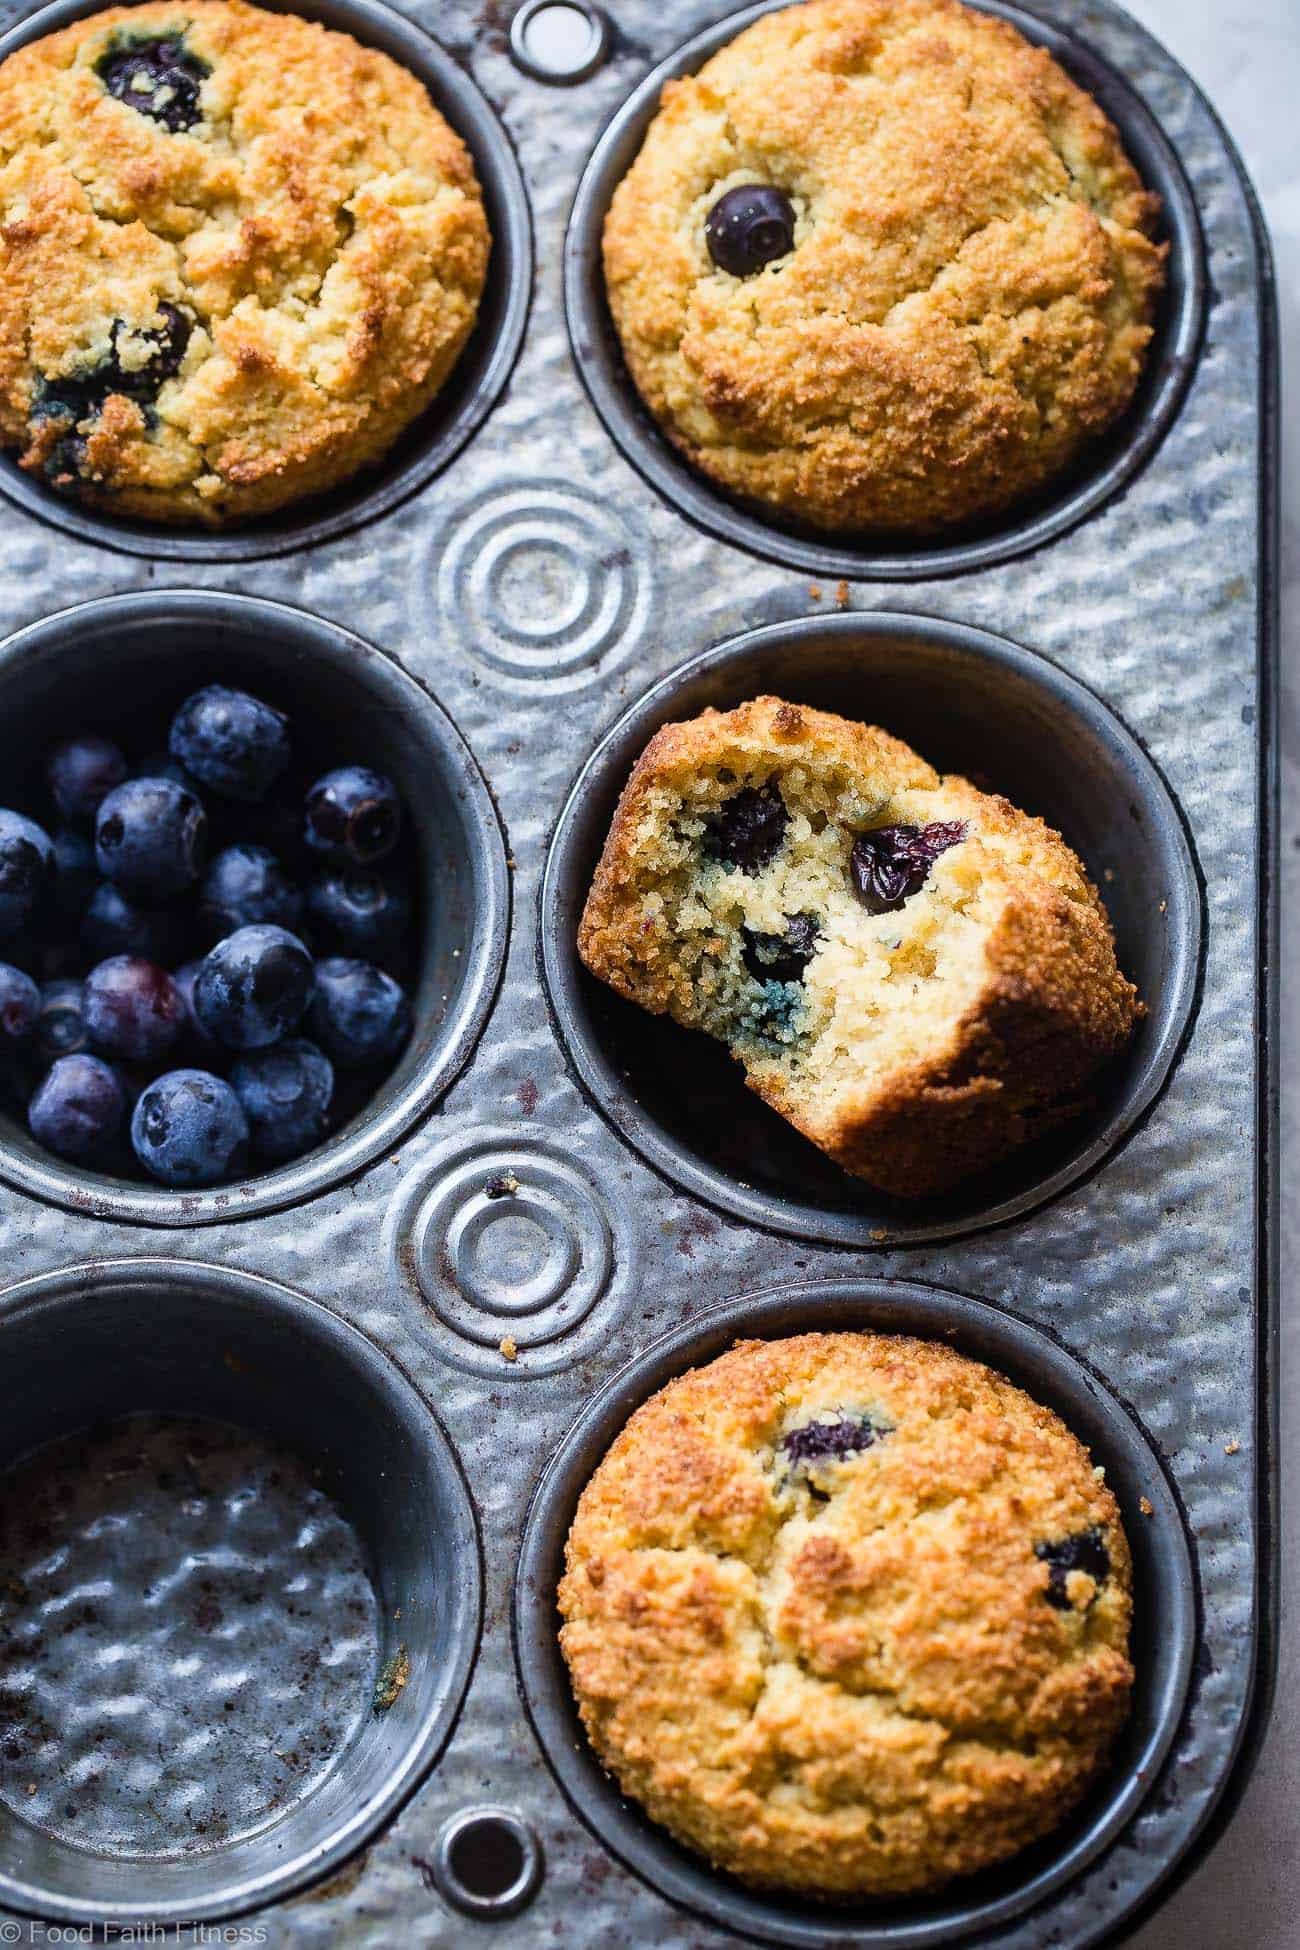 Healthy Keto Muffins
 Low Carb Sugar Free Keto Blueberry Muffins with Almond Flour